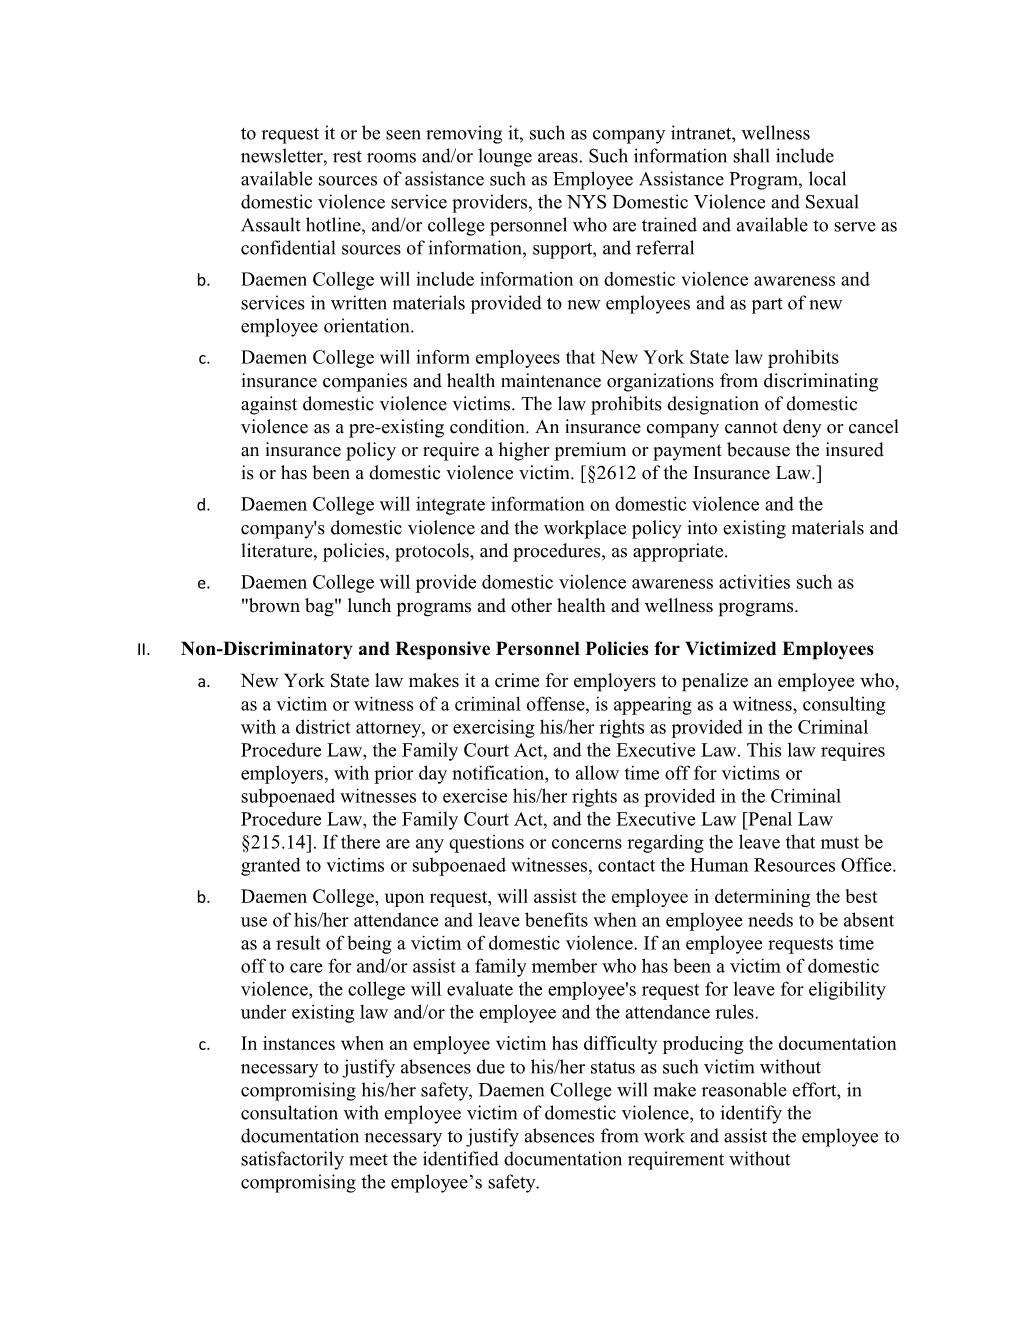 Policy Statement s4